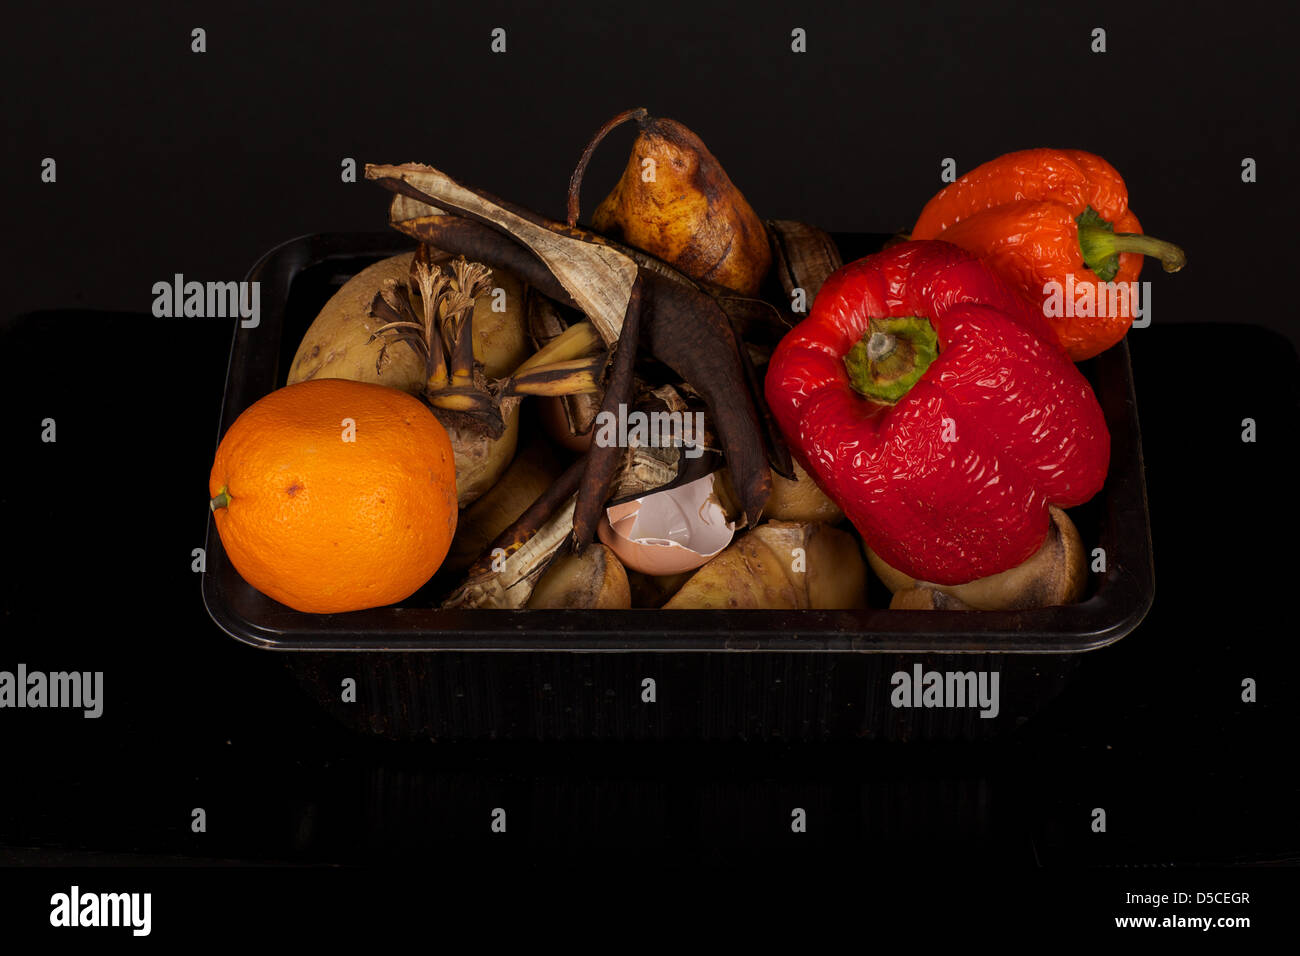 rotting fruit and vegetables with a black background Stock Photo